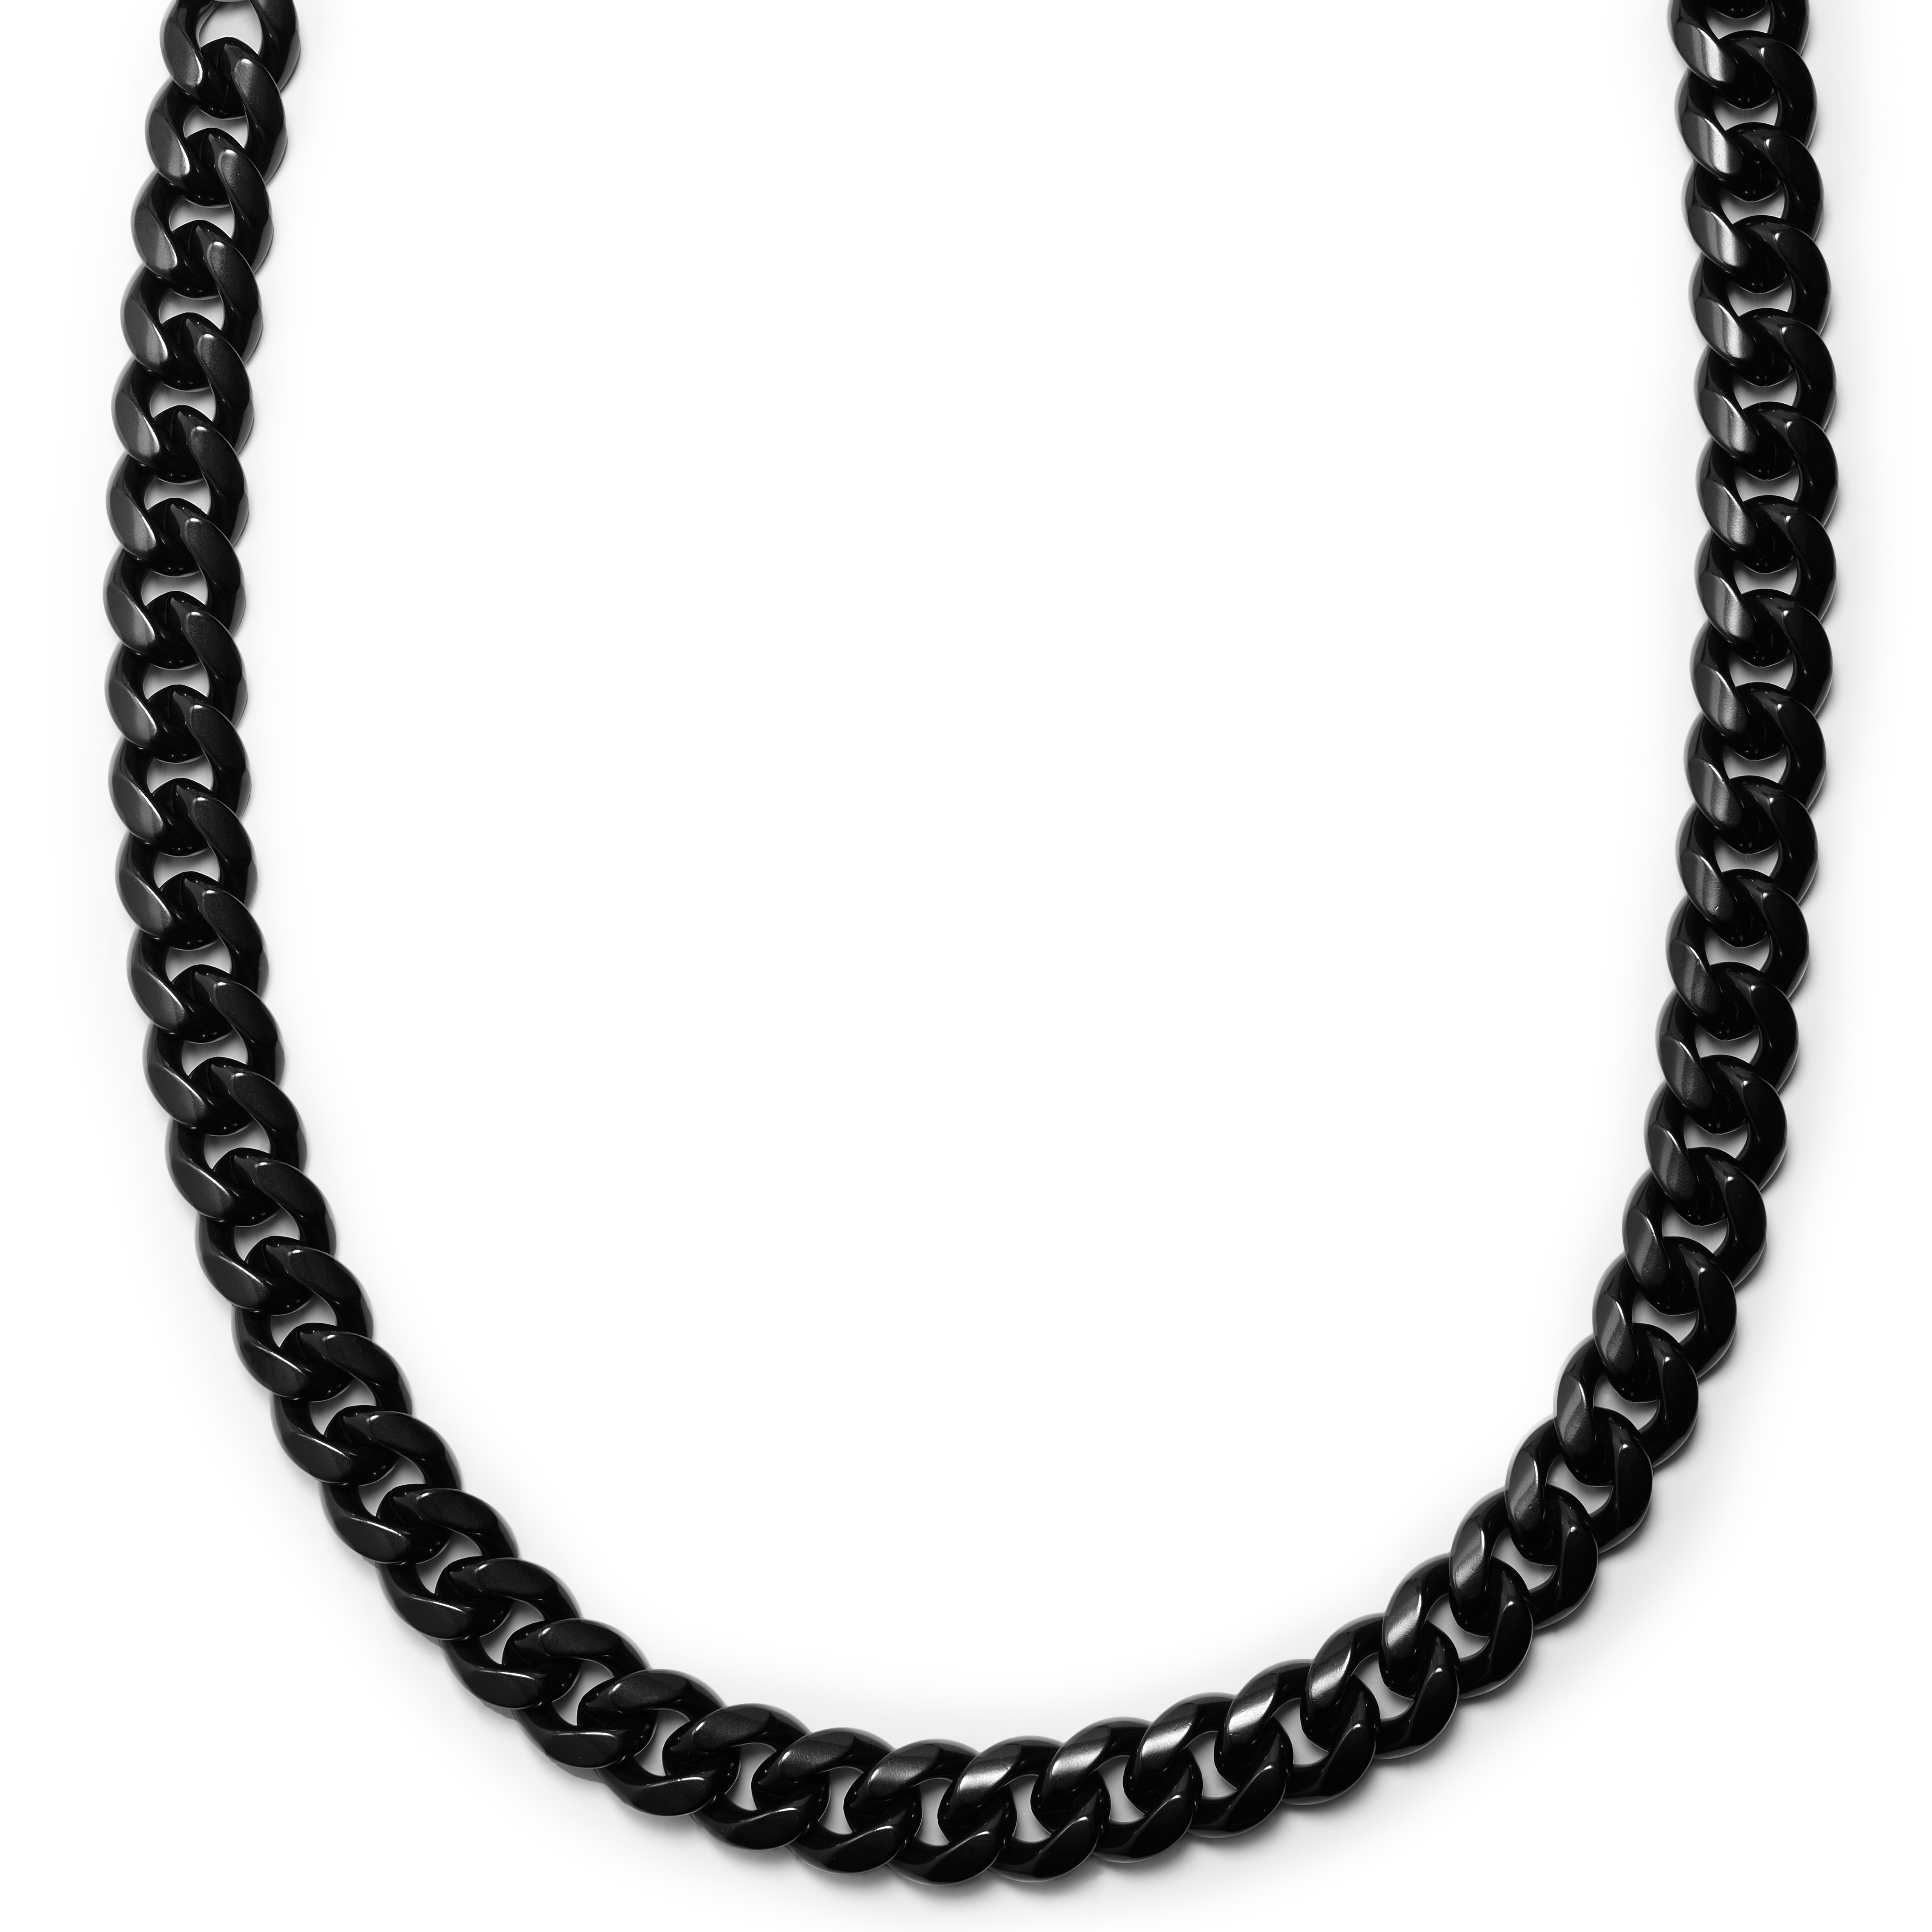 5 reasons why black necklaces are a must-have accessory for men